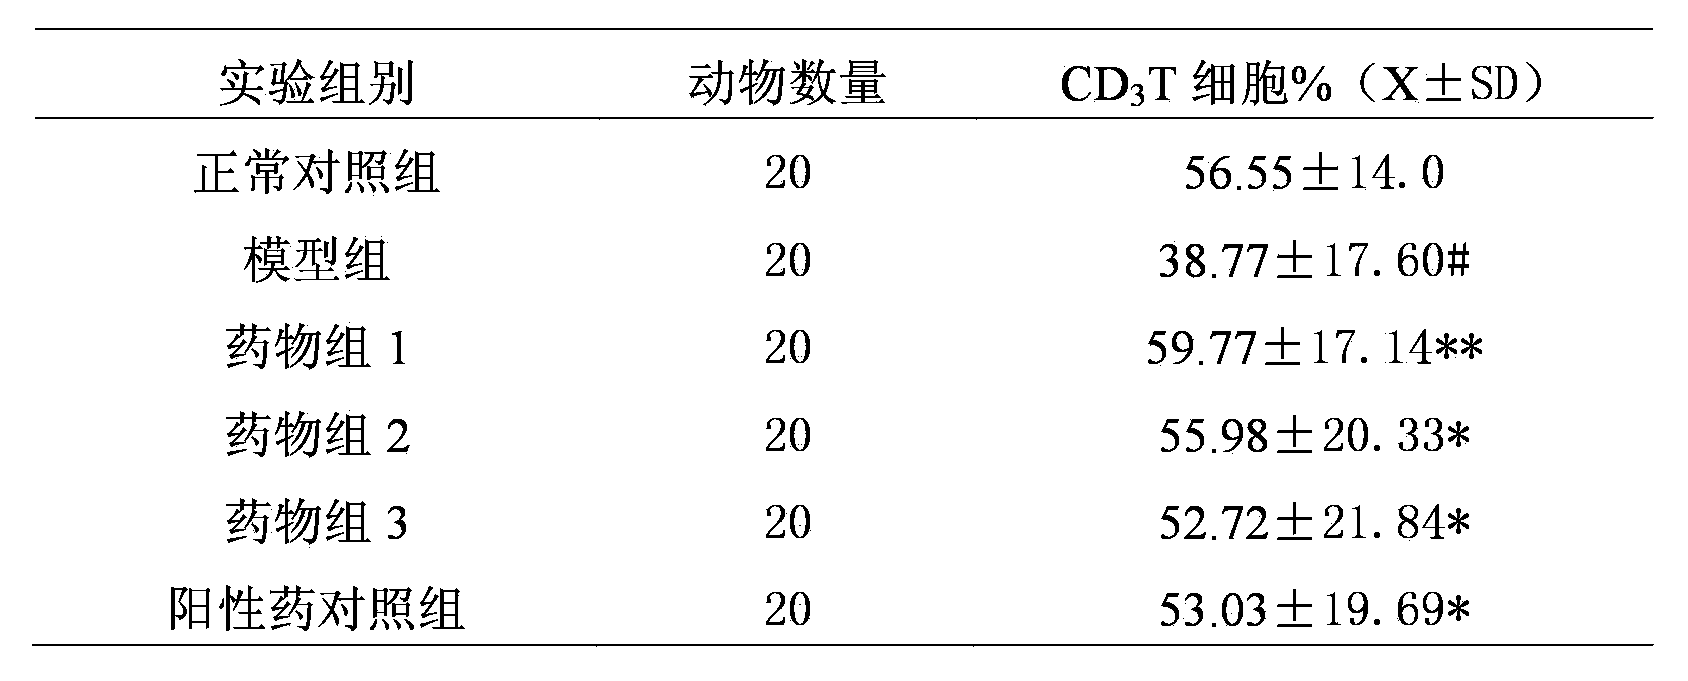 Composition for preventing and treating HIV/AIDS (Human Immunodeficiency Virus/ Acquired Immune Deficiency Syndrome) and preparation method thereof